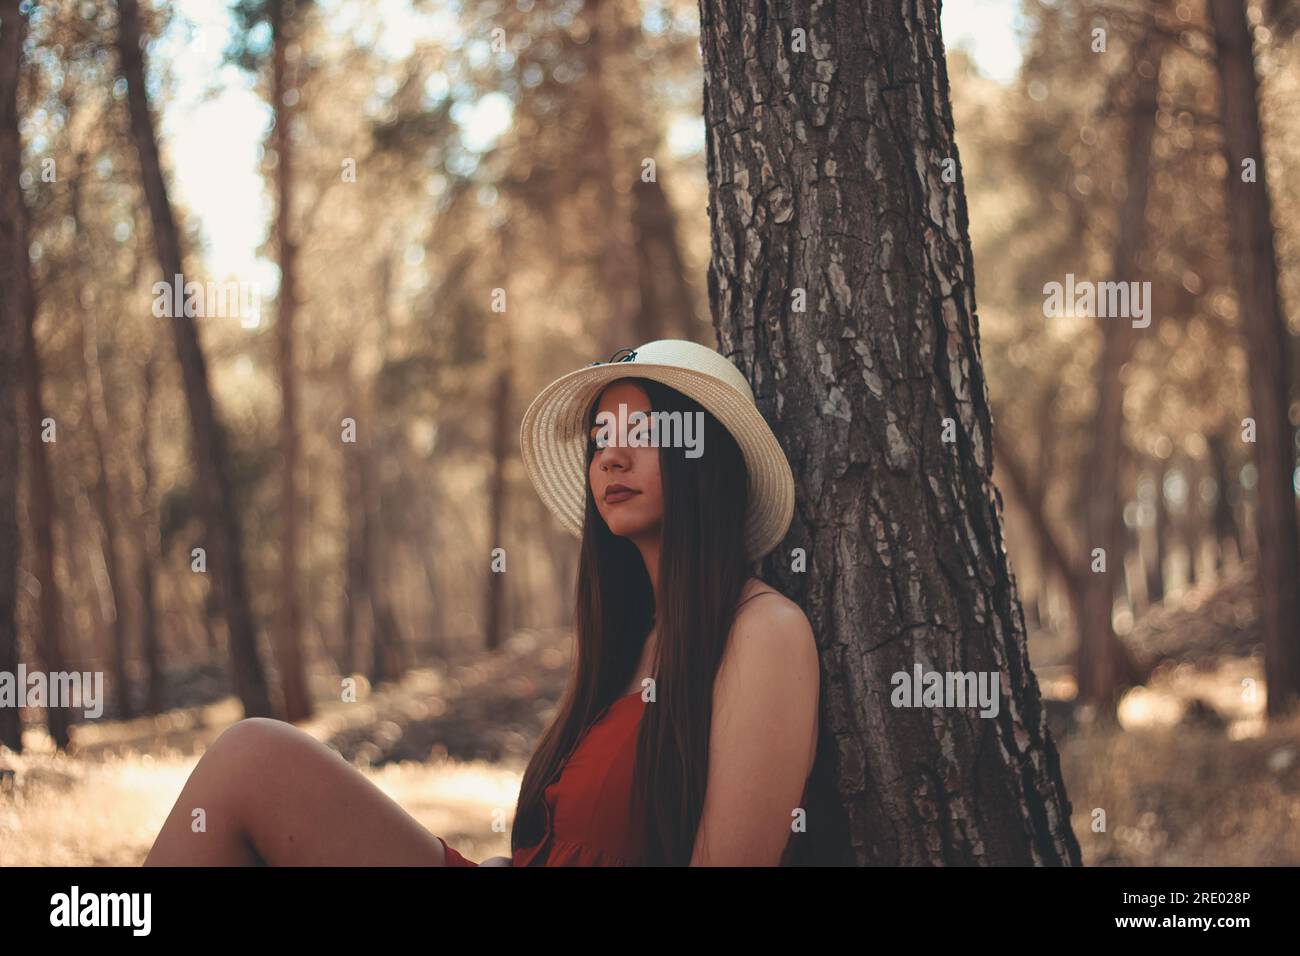 A girl in a relaxing way in a forest during a sunny spring day Stock Photo